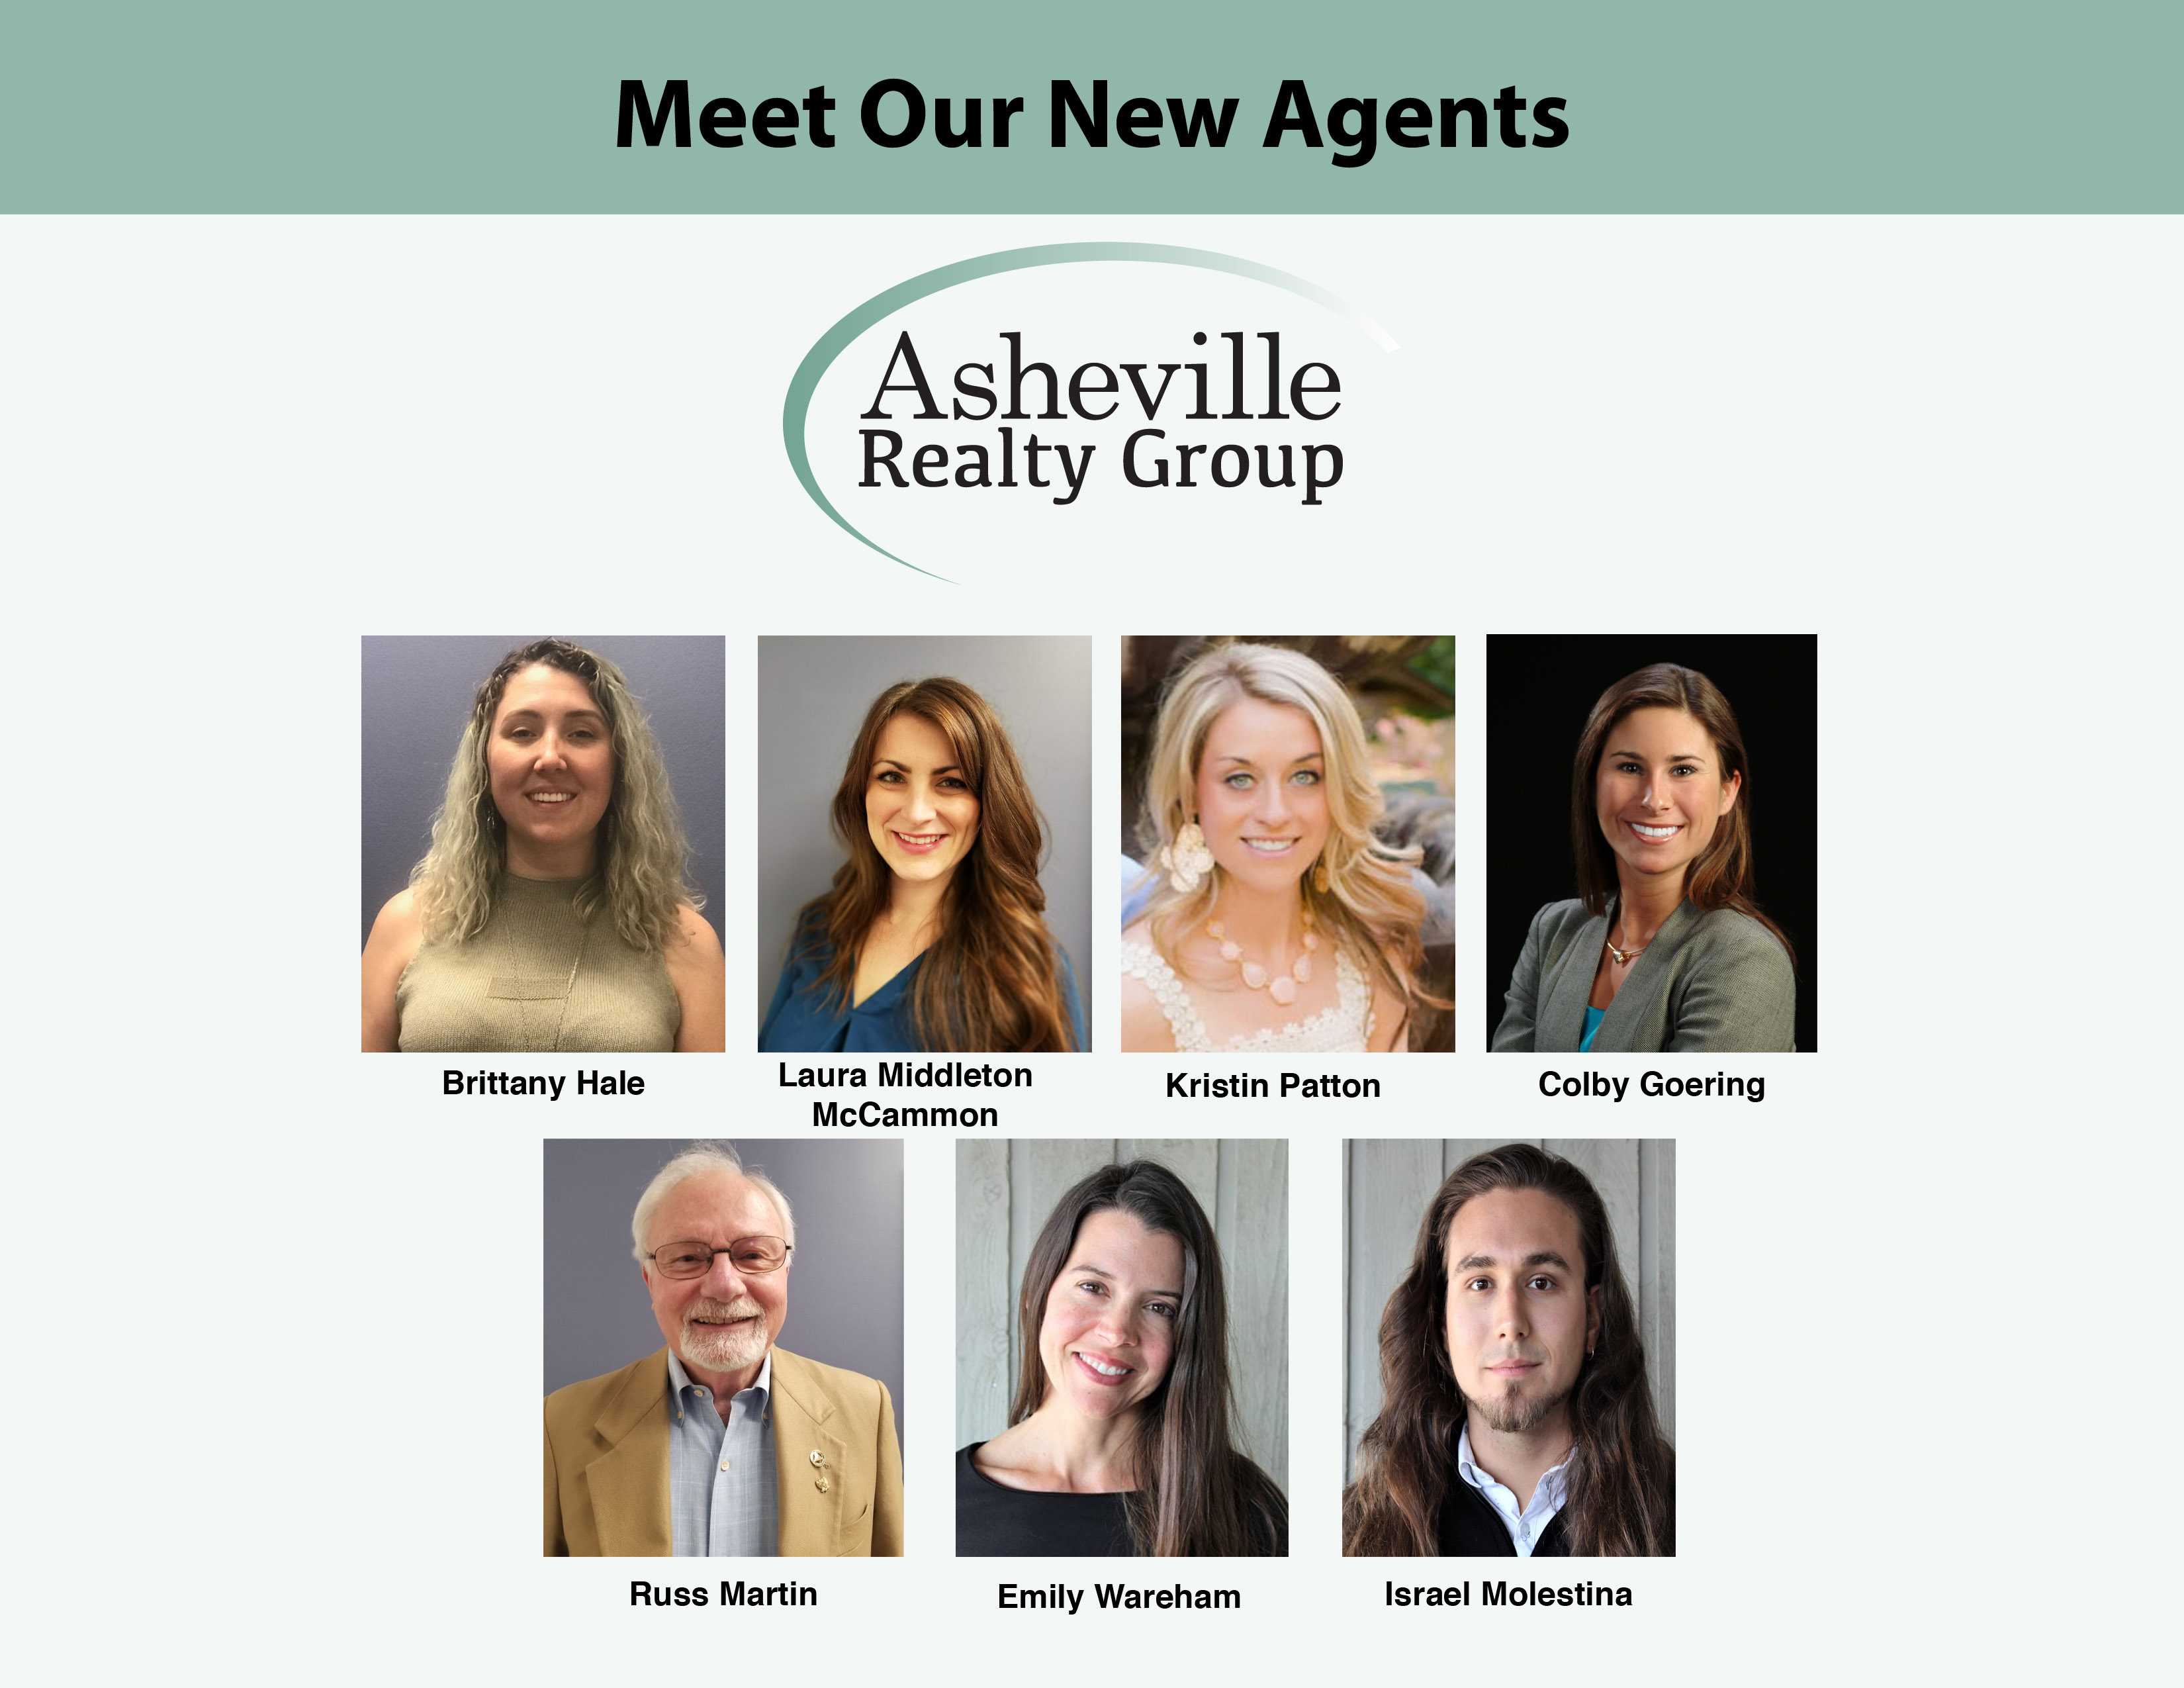 real estate agents